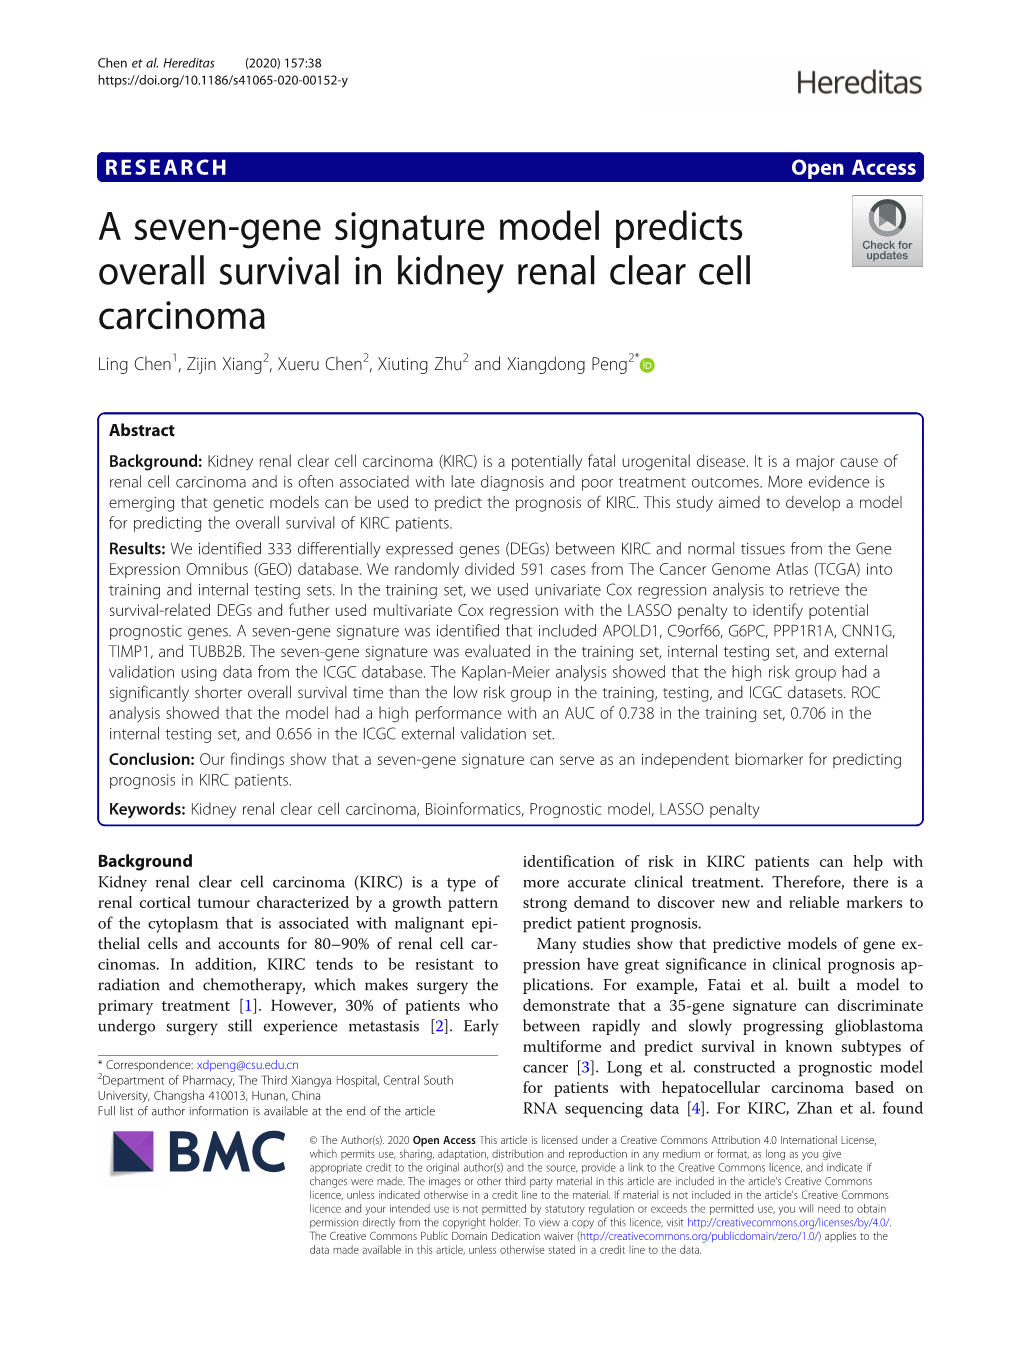 A Seven-Gene Signature Model Predicts Overall Survival in Kidney Renal Clear Cell Carcinoma Ling Chen1, Zijin Xiang2, Xueru Chen2, Xiuting Zhu2 and Xiangdong Peng2*